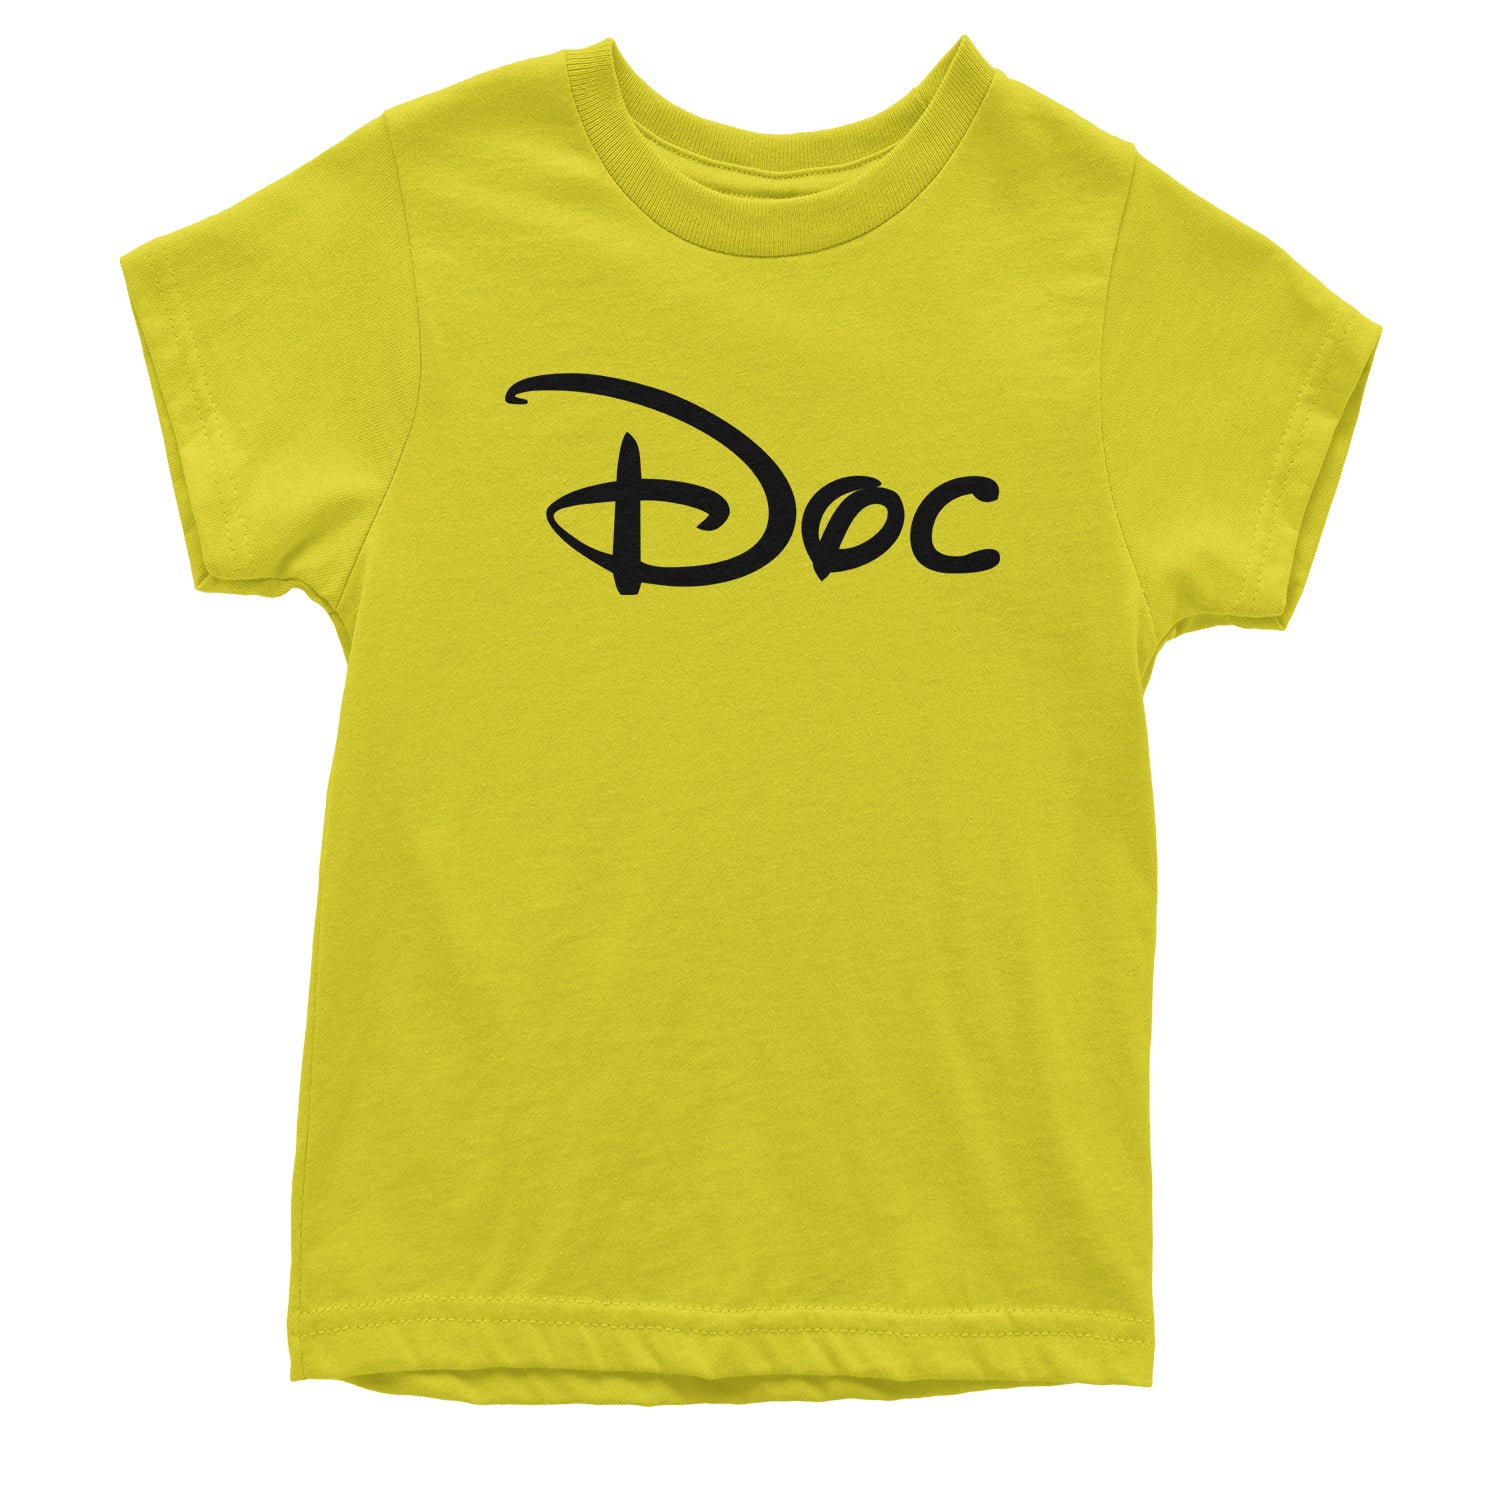 Doc - 7 Dwarfs Costume Youth T-shirt and, costume, dwarfs, group, halloween, matching, seven, snow, the, white by Expression Tees